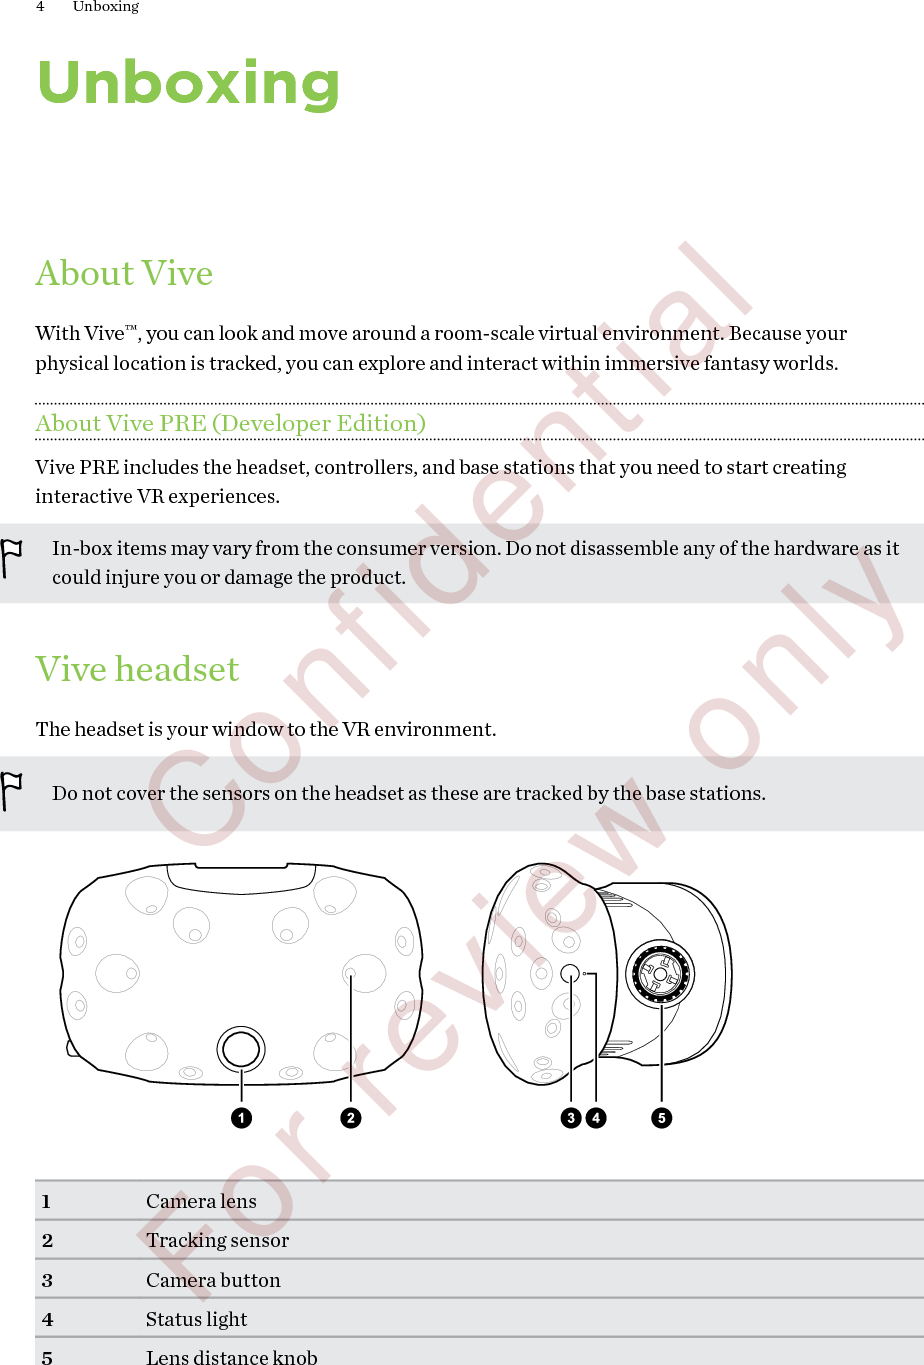 UnboxingAbout ViveWith Vive™, you can look and move around a room-scale virtual environment. Because yourphysical location is tracked, you can explore and interact within immersive fantasy worlds.About Vive PRE (Developer Edition)Vive PRE includes the headset, controllers, and base stations that you need to start creatinginteractive VR experiences.In-box items may vary from the consumer version. Do not disassemble any of the hardware as itcould injure you or damage the product.Vive headsetThe headset is your window to the VR environment.Do not cover the sensors on the headset as these are tracked by the base stations.1Camera lens2Tracking sensor3Camera button4Status light5Lens distance knob4 Unboxing        Confidential  For review only